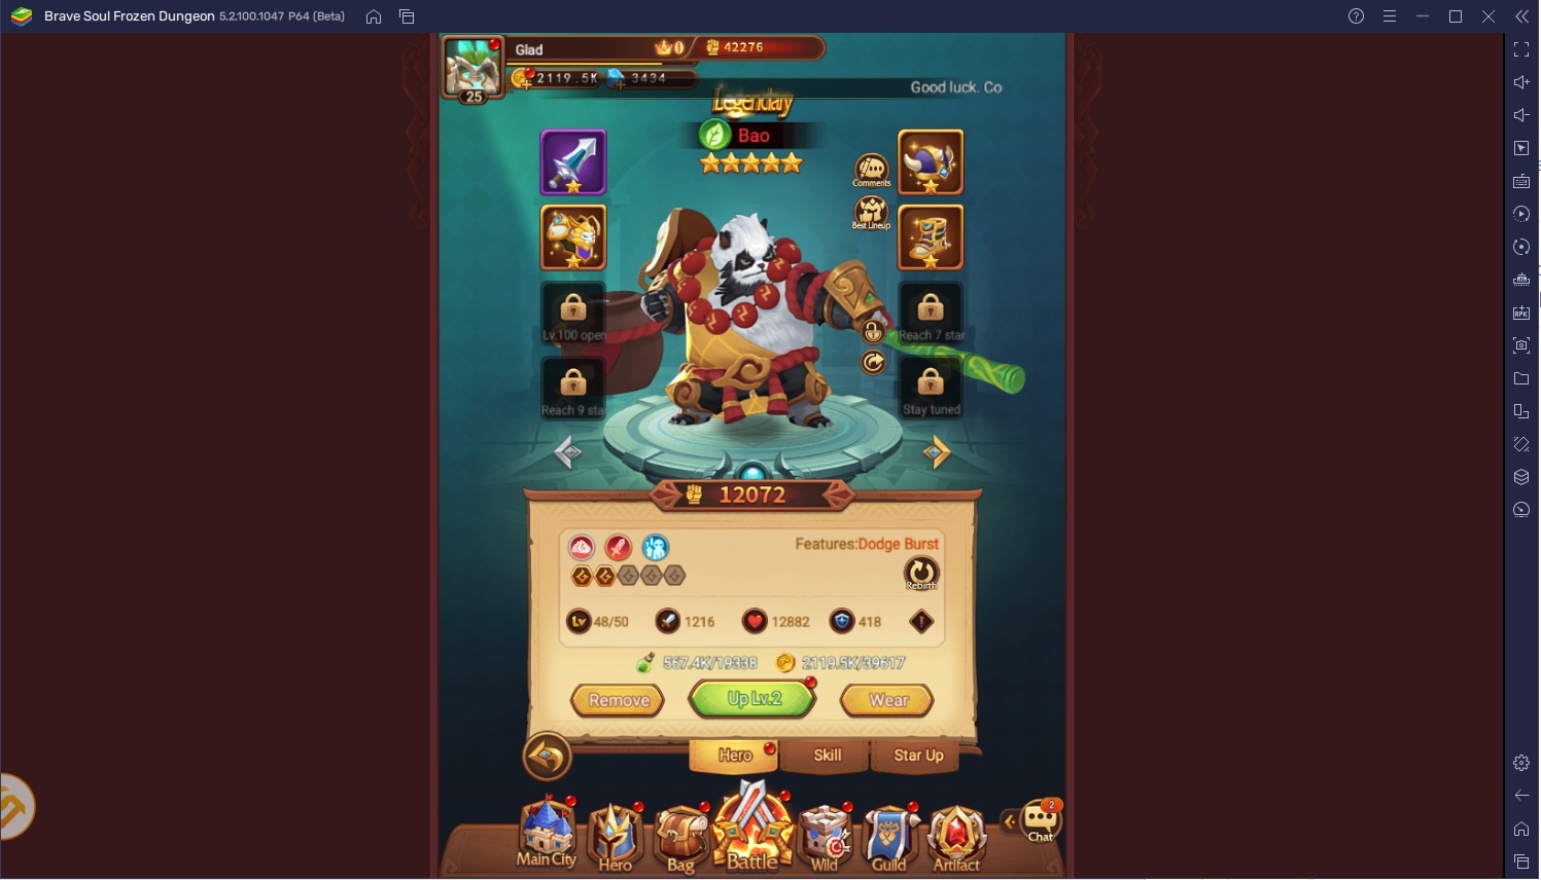 How to Increase CP in Brave Soul: Frozen Dungeon